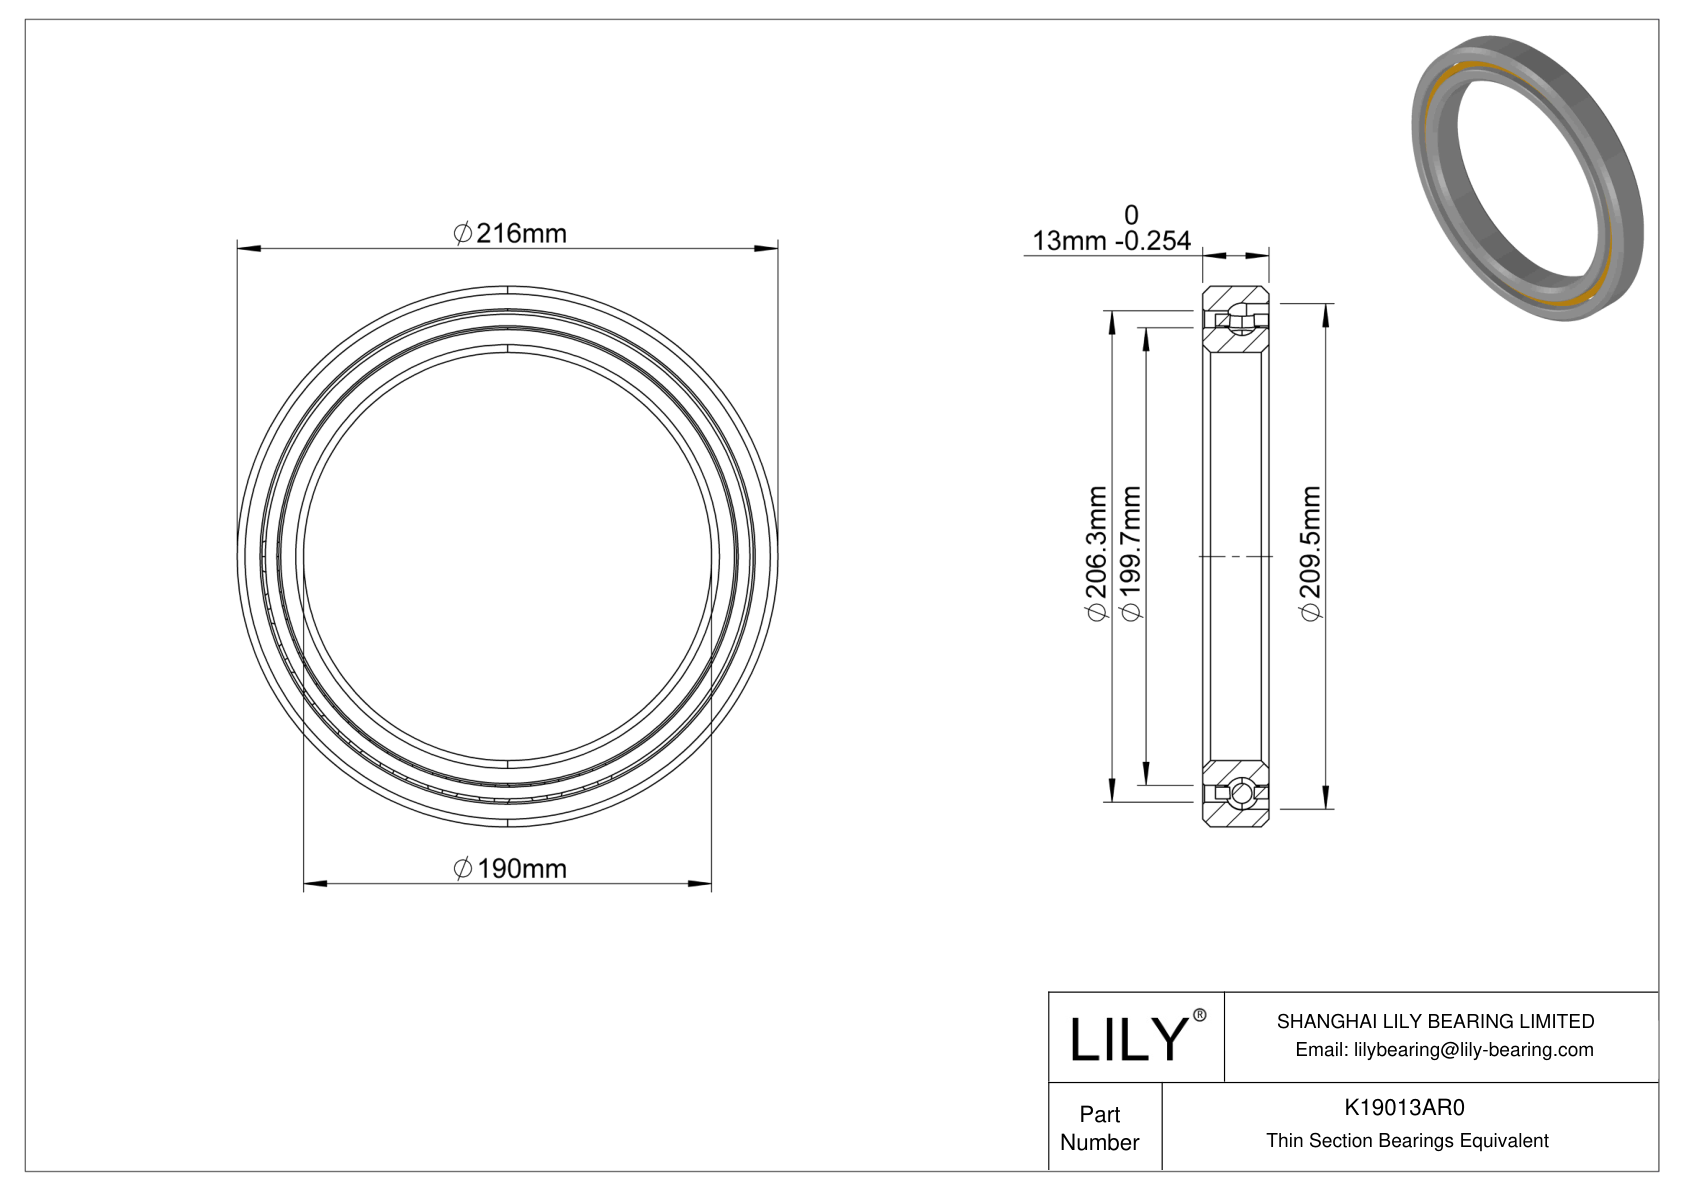 K19013AR0 Constant Section (CS) Bearings cad drawing